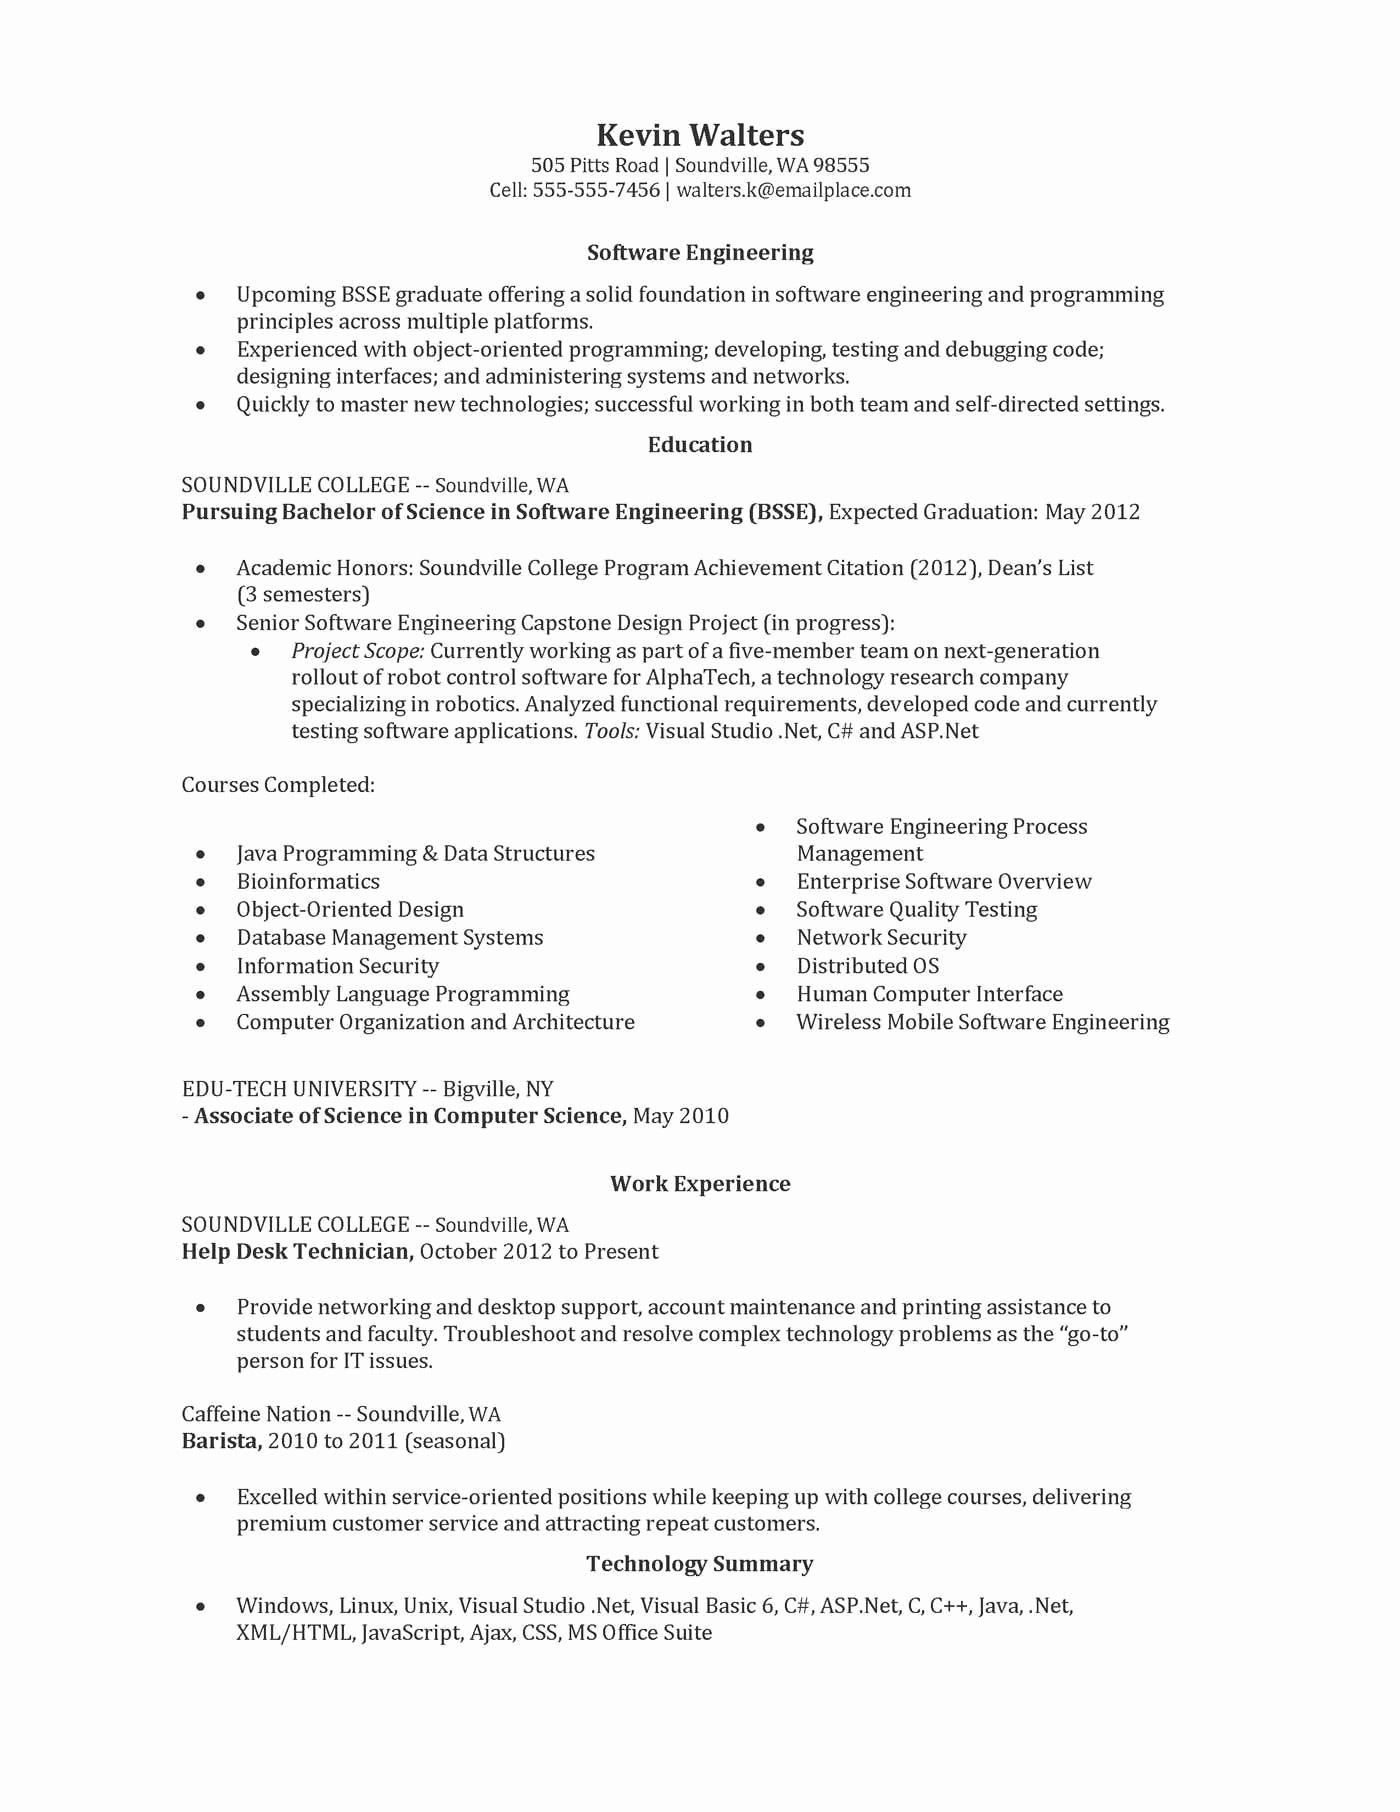 Information Technology Cover Letter Template - Information Technology Resume Template Unique Lpn Resume Sample New